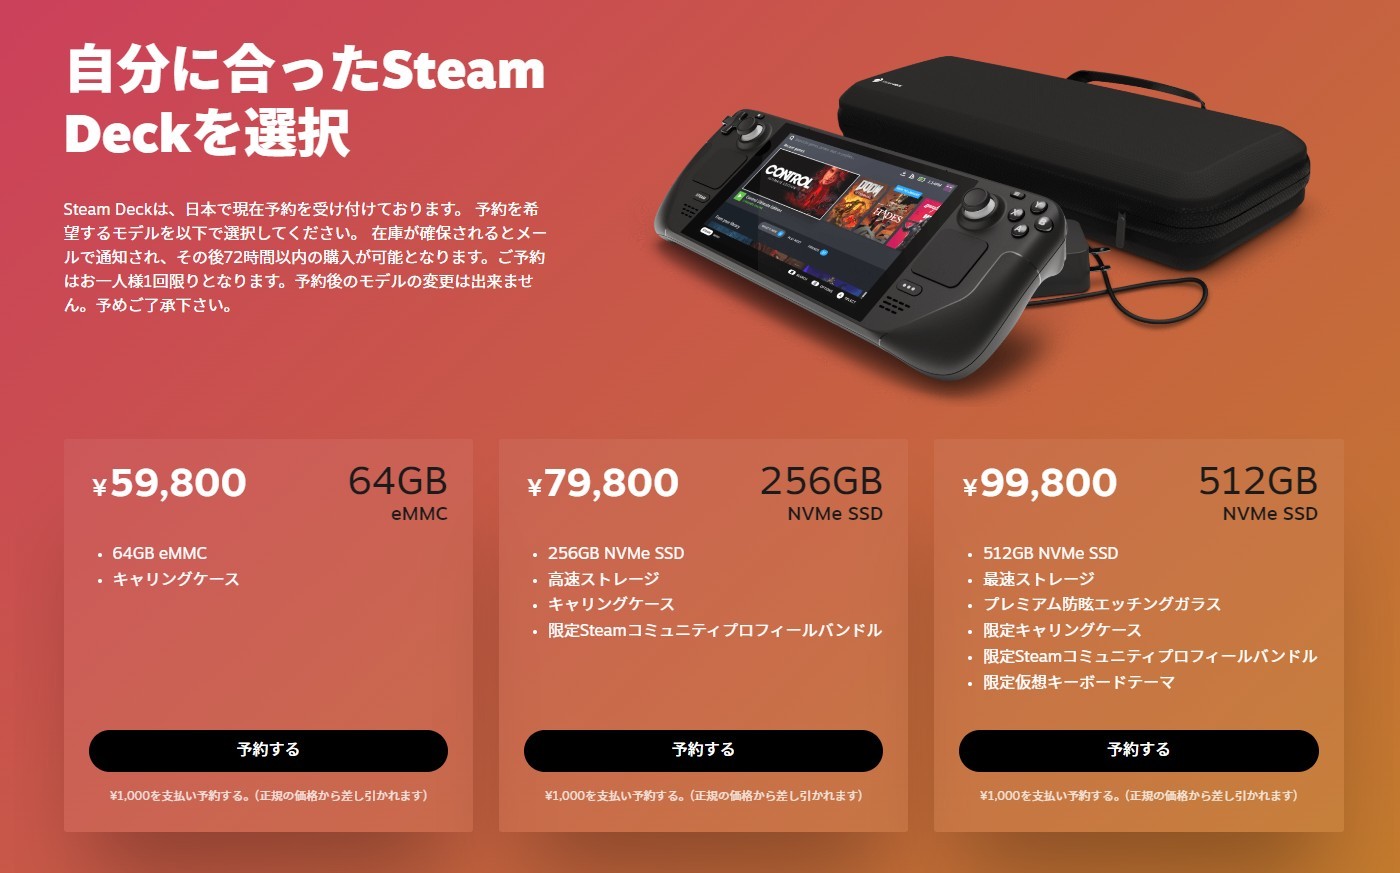 Valve launches the Steam Deck in Japan, South Korea, Taiwan and Hong Kong